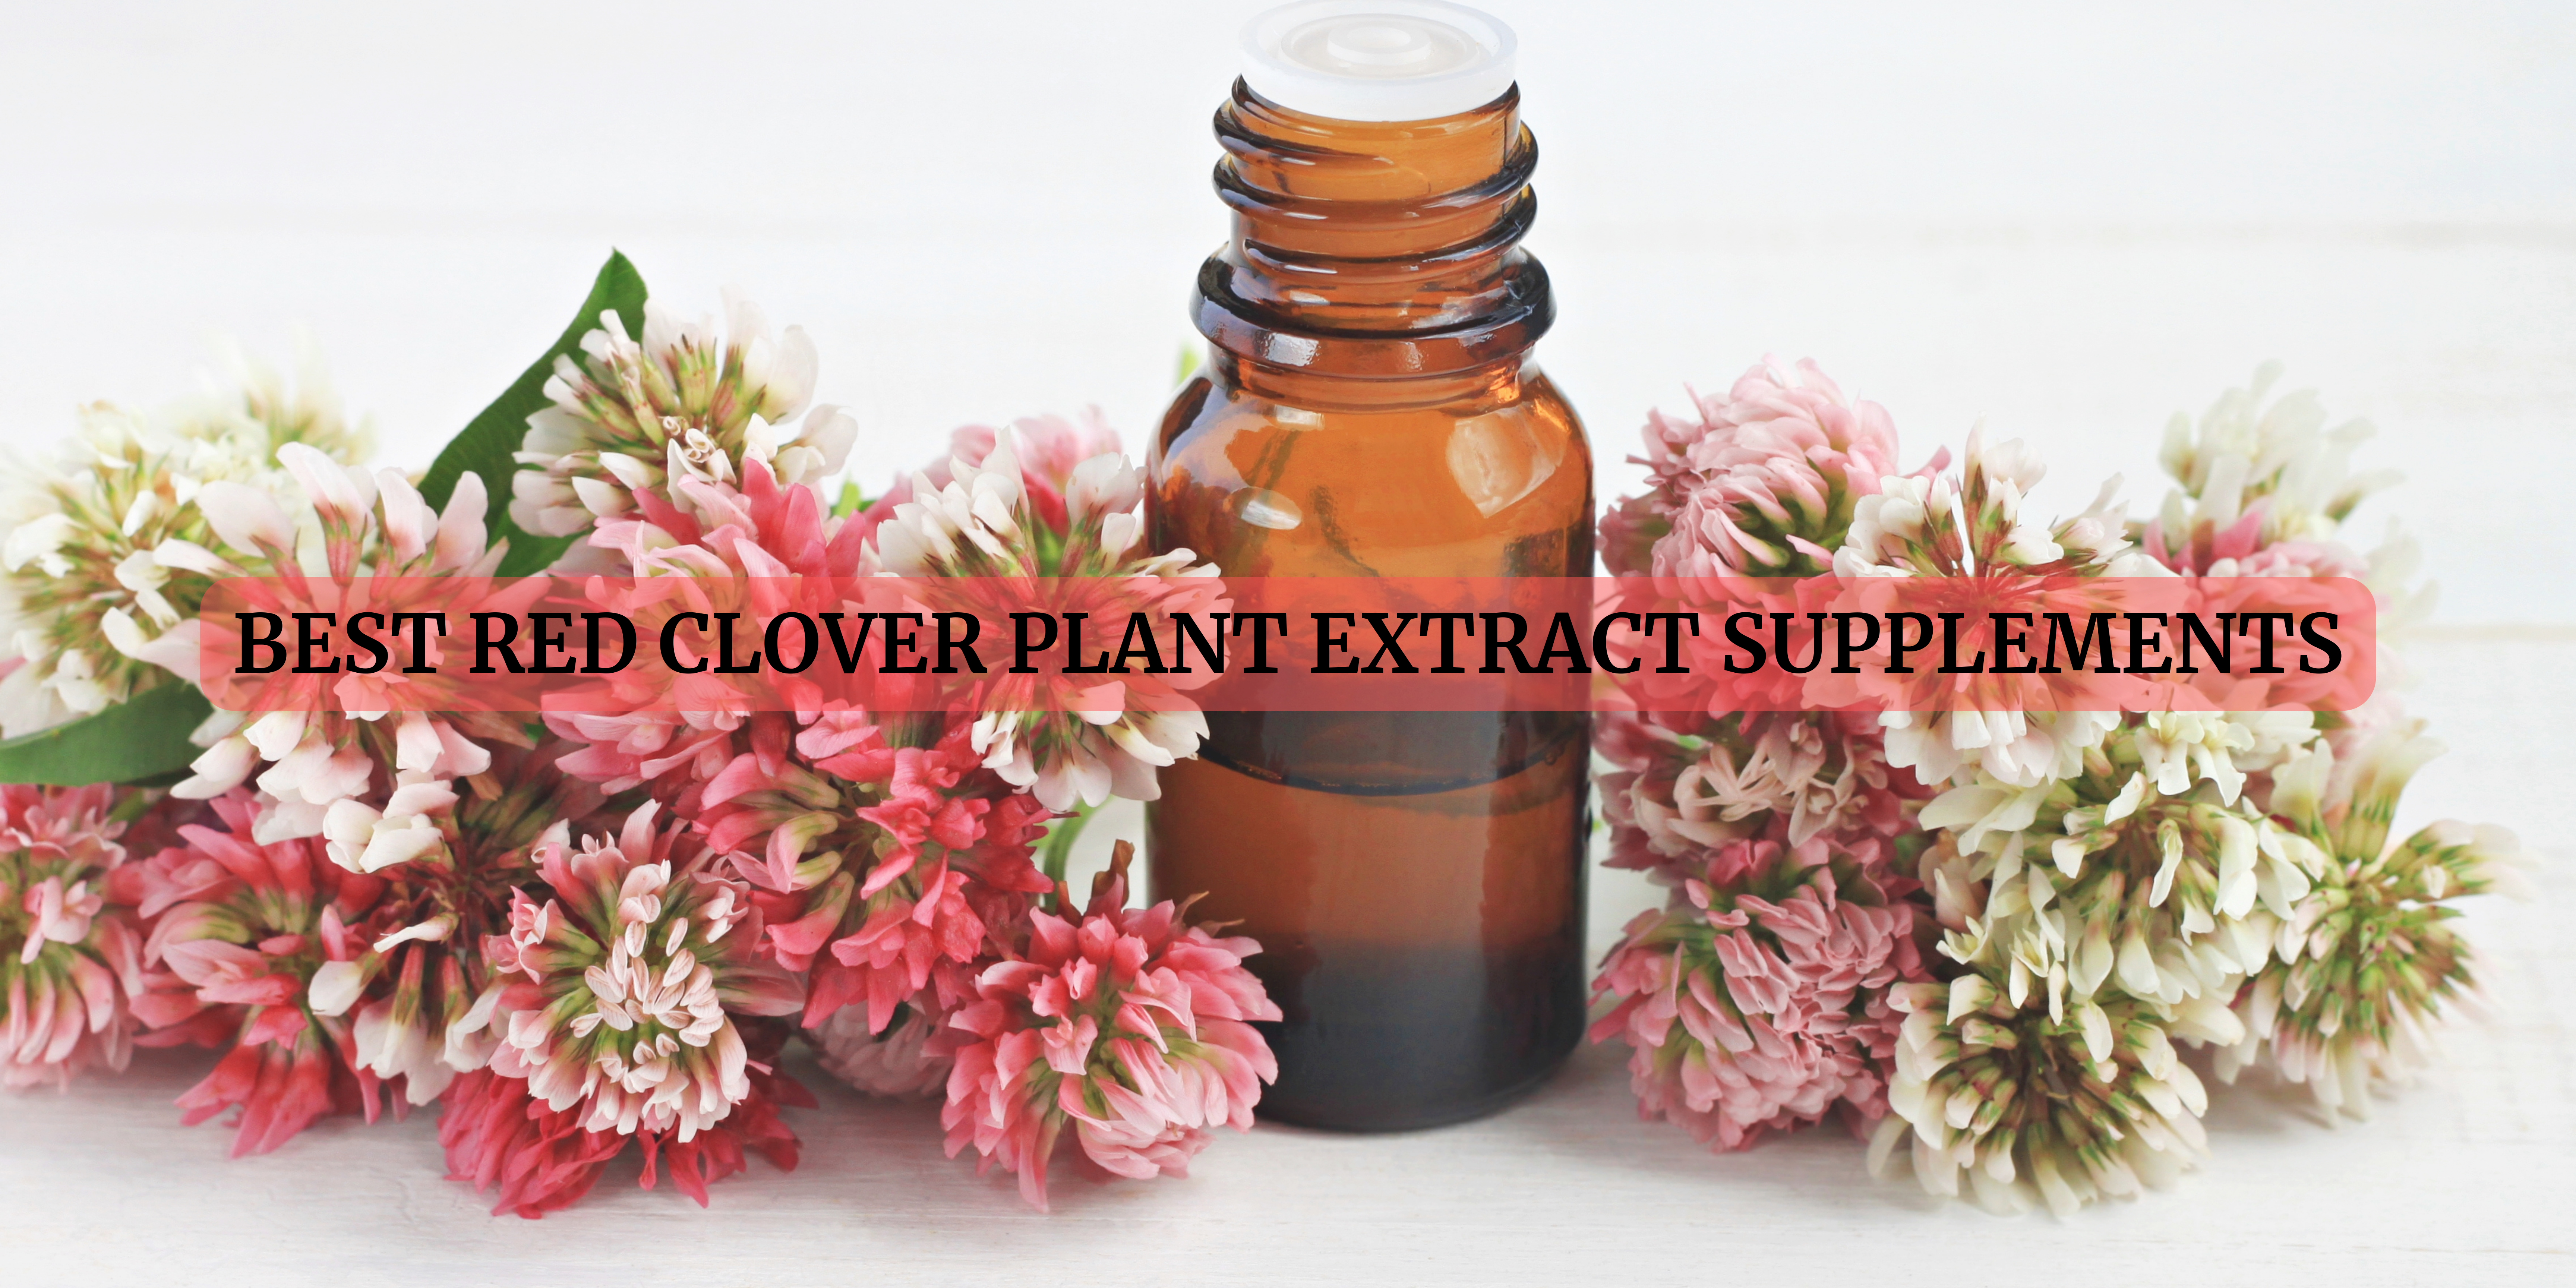 red clover extract supplements in Germany